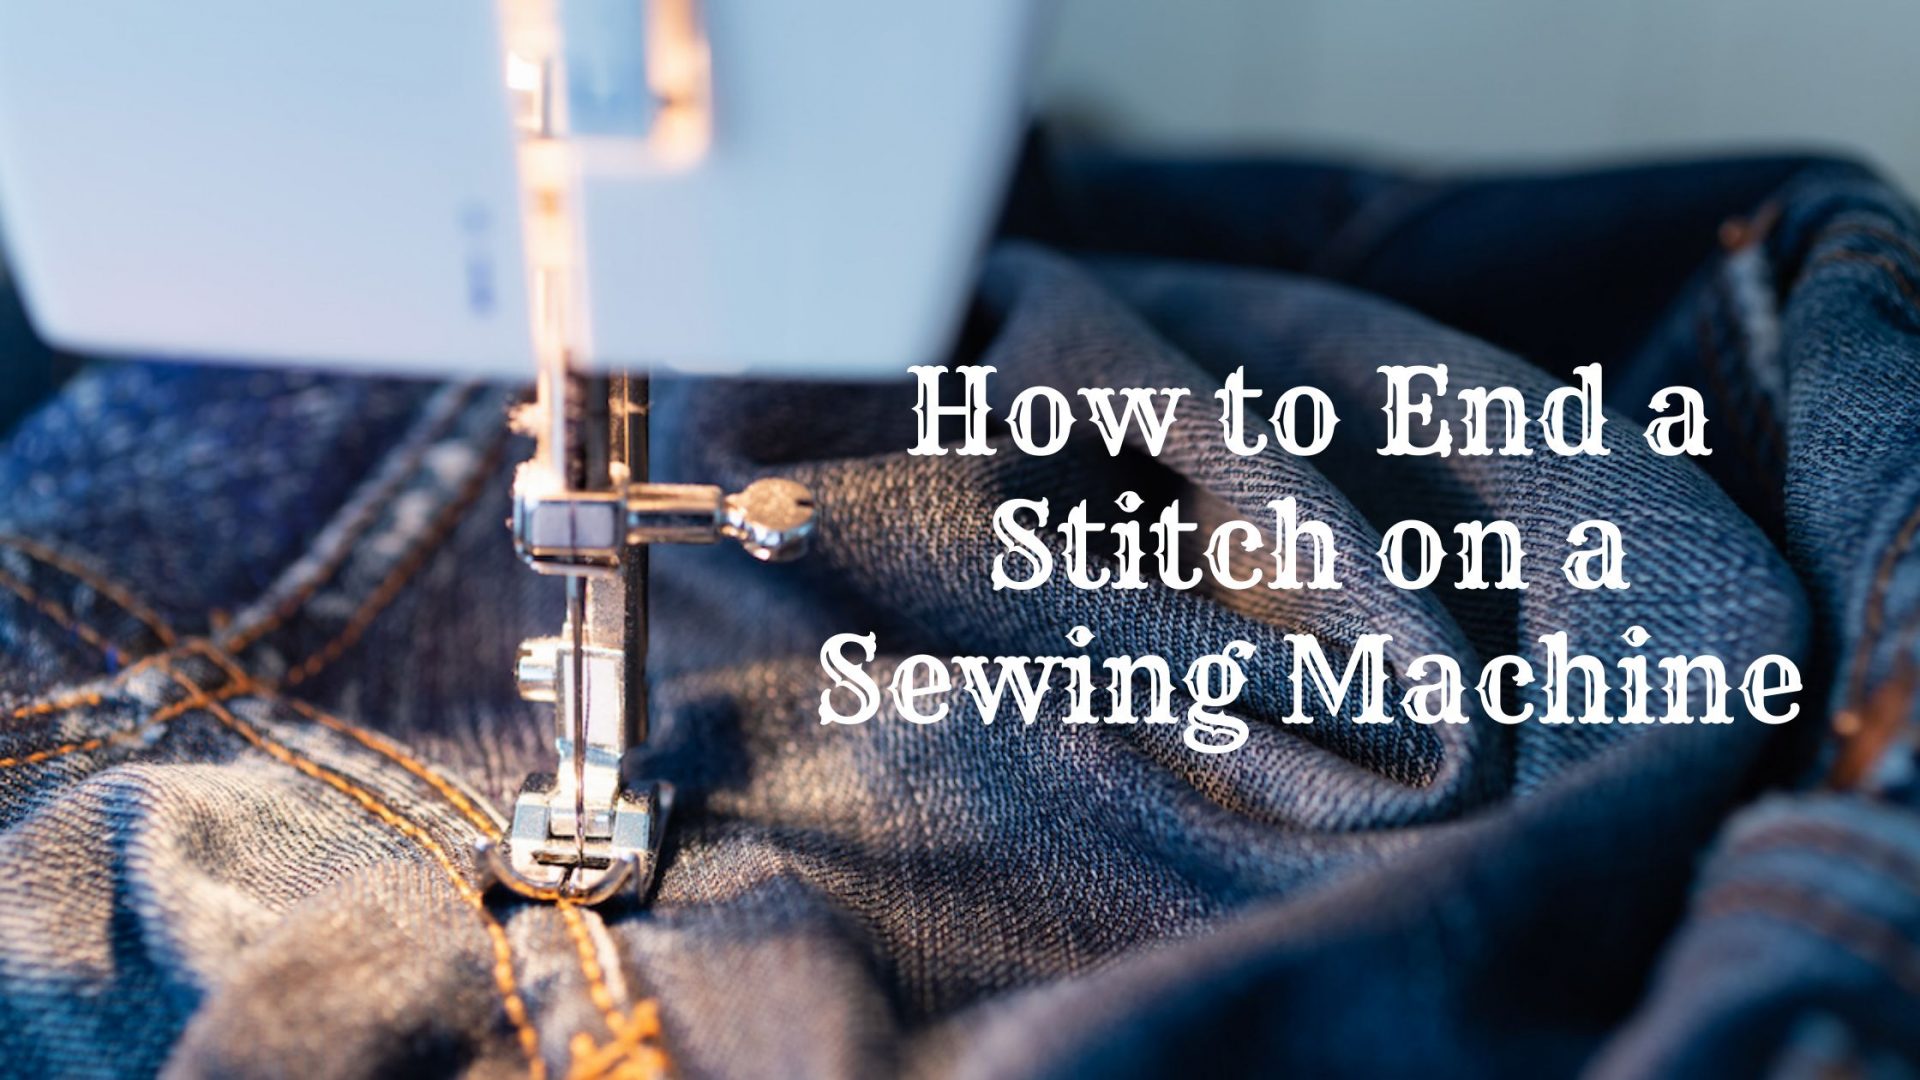 How to End a Stitch on a Sewing Machine